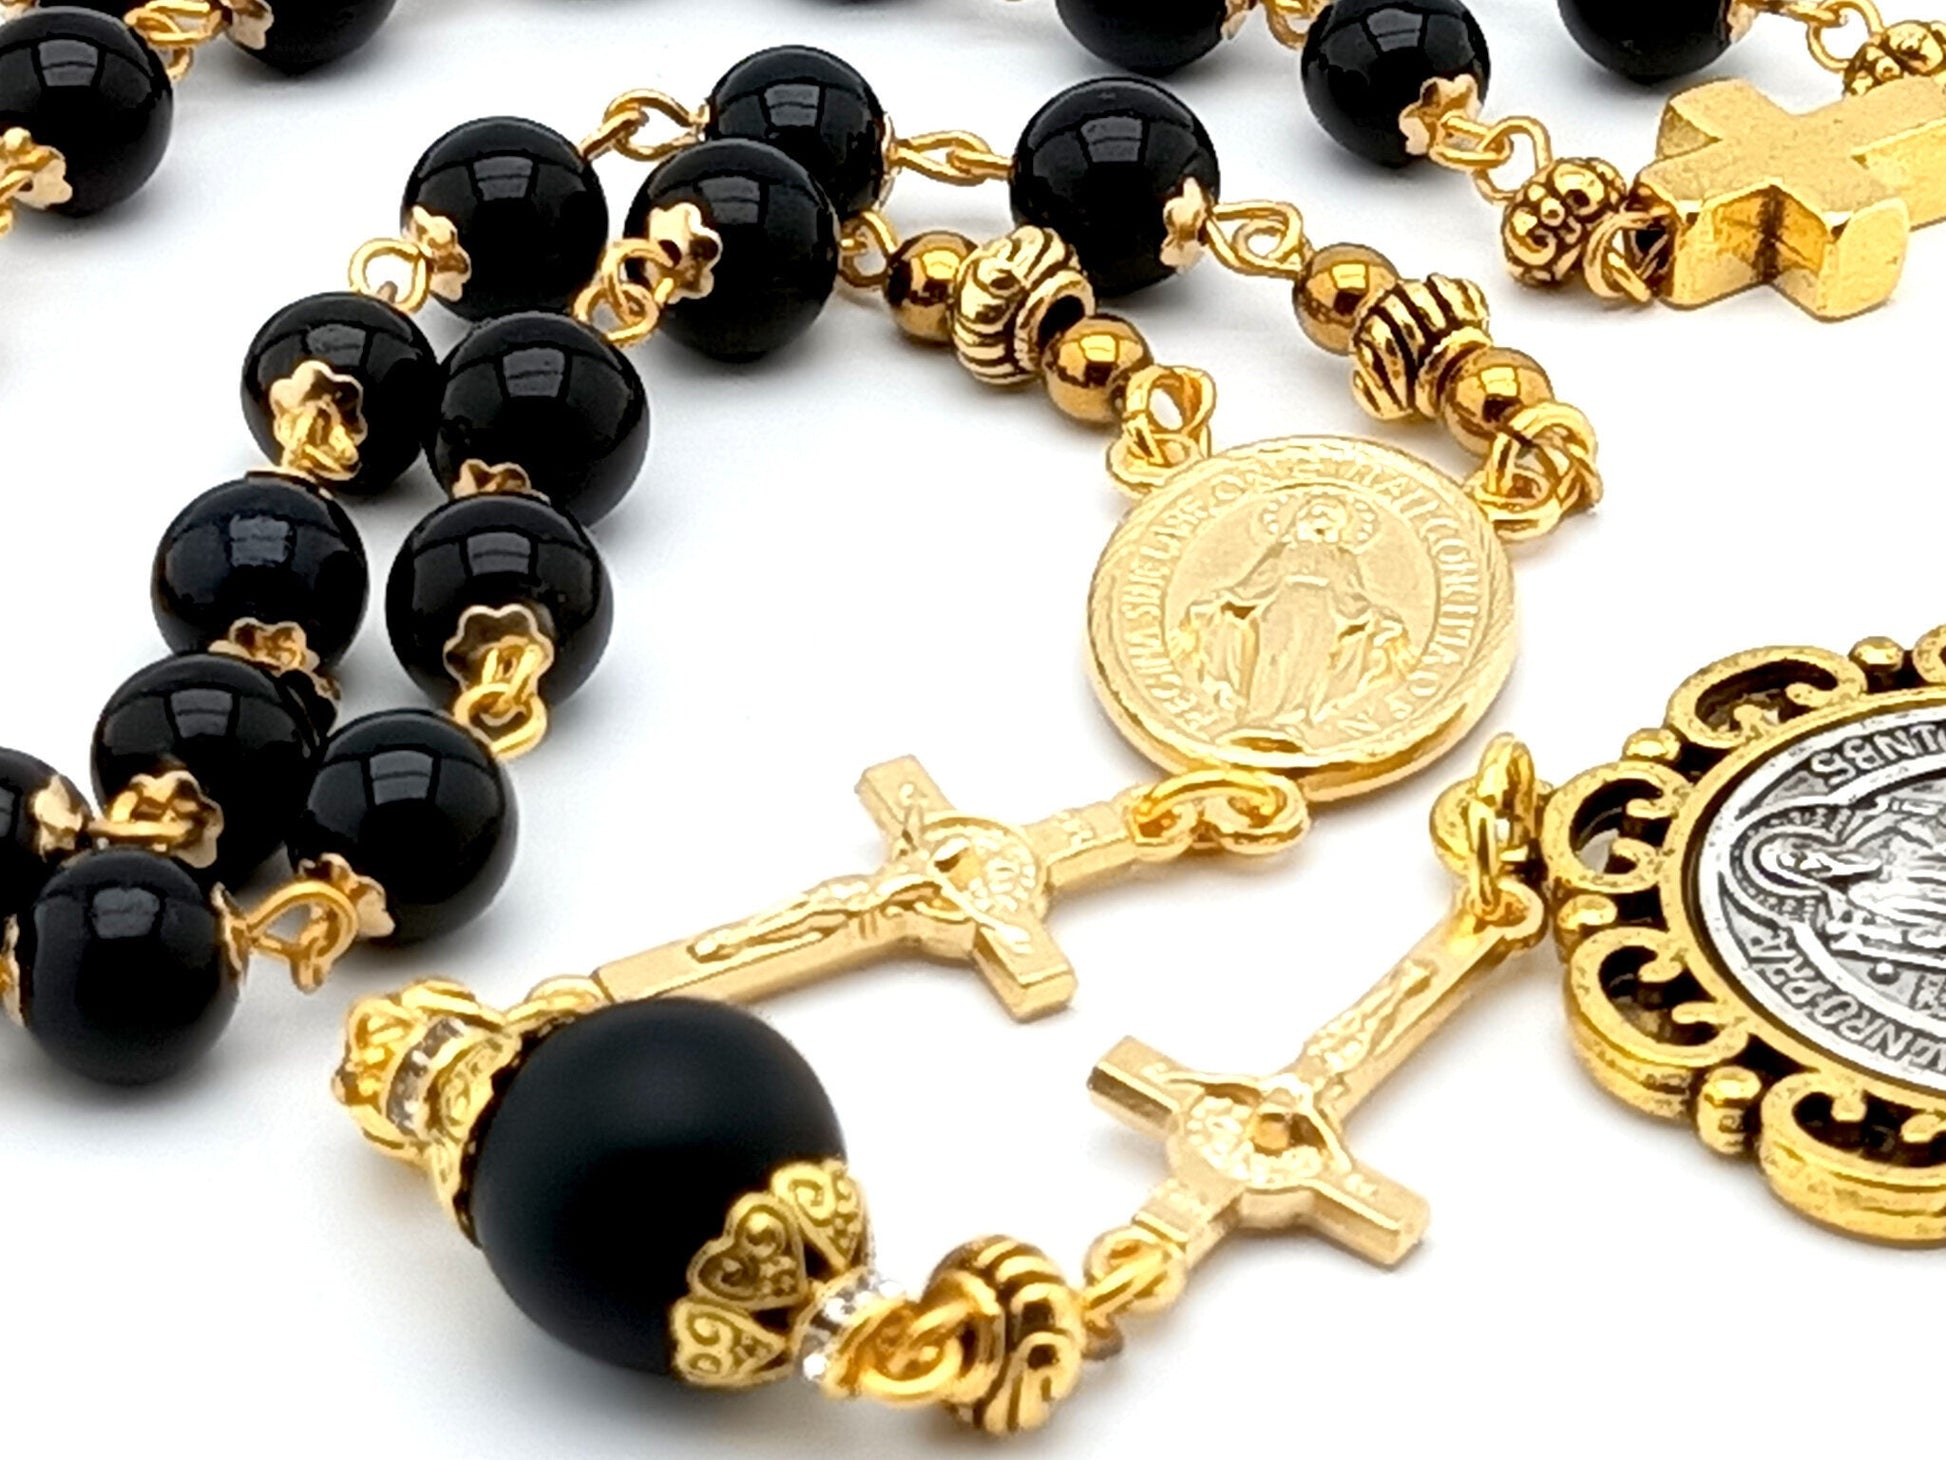 Saint Benedict unique rosary beads prayer chaplet with black and gold beads, medals and linking crucifixes.